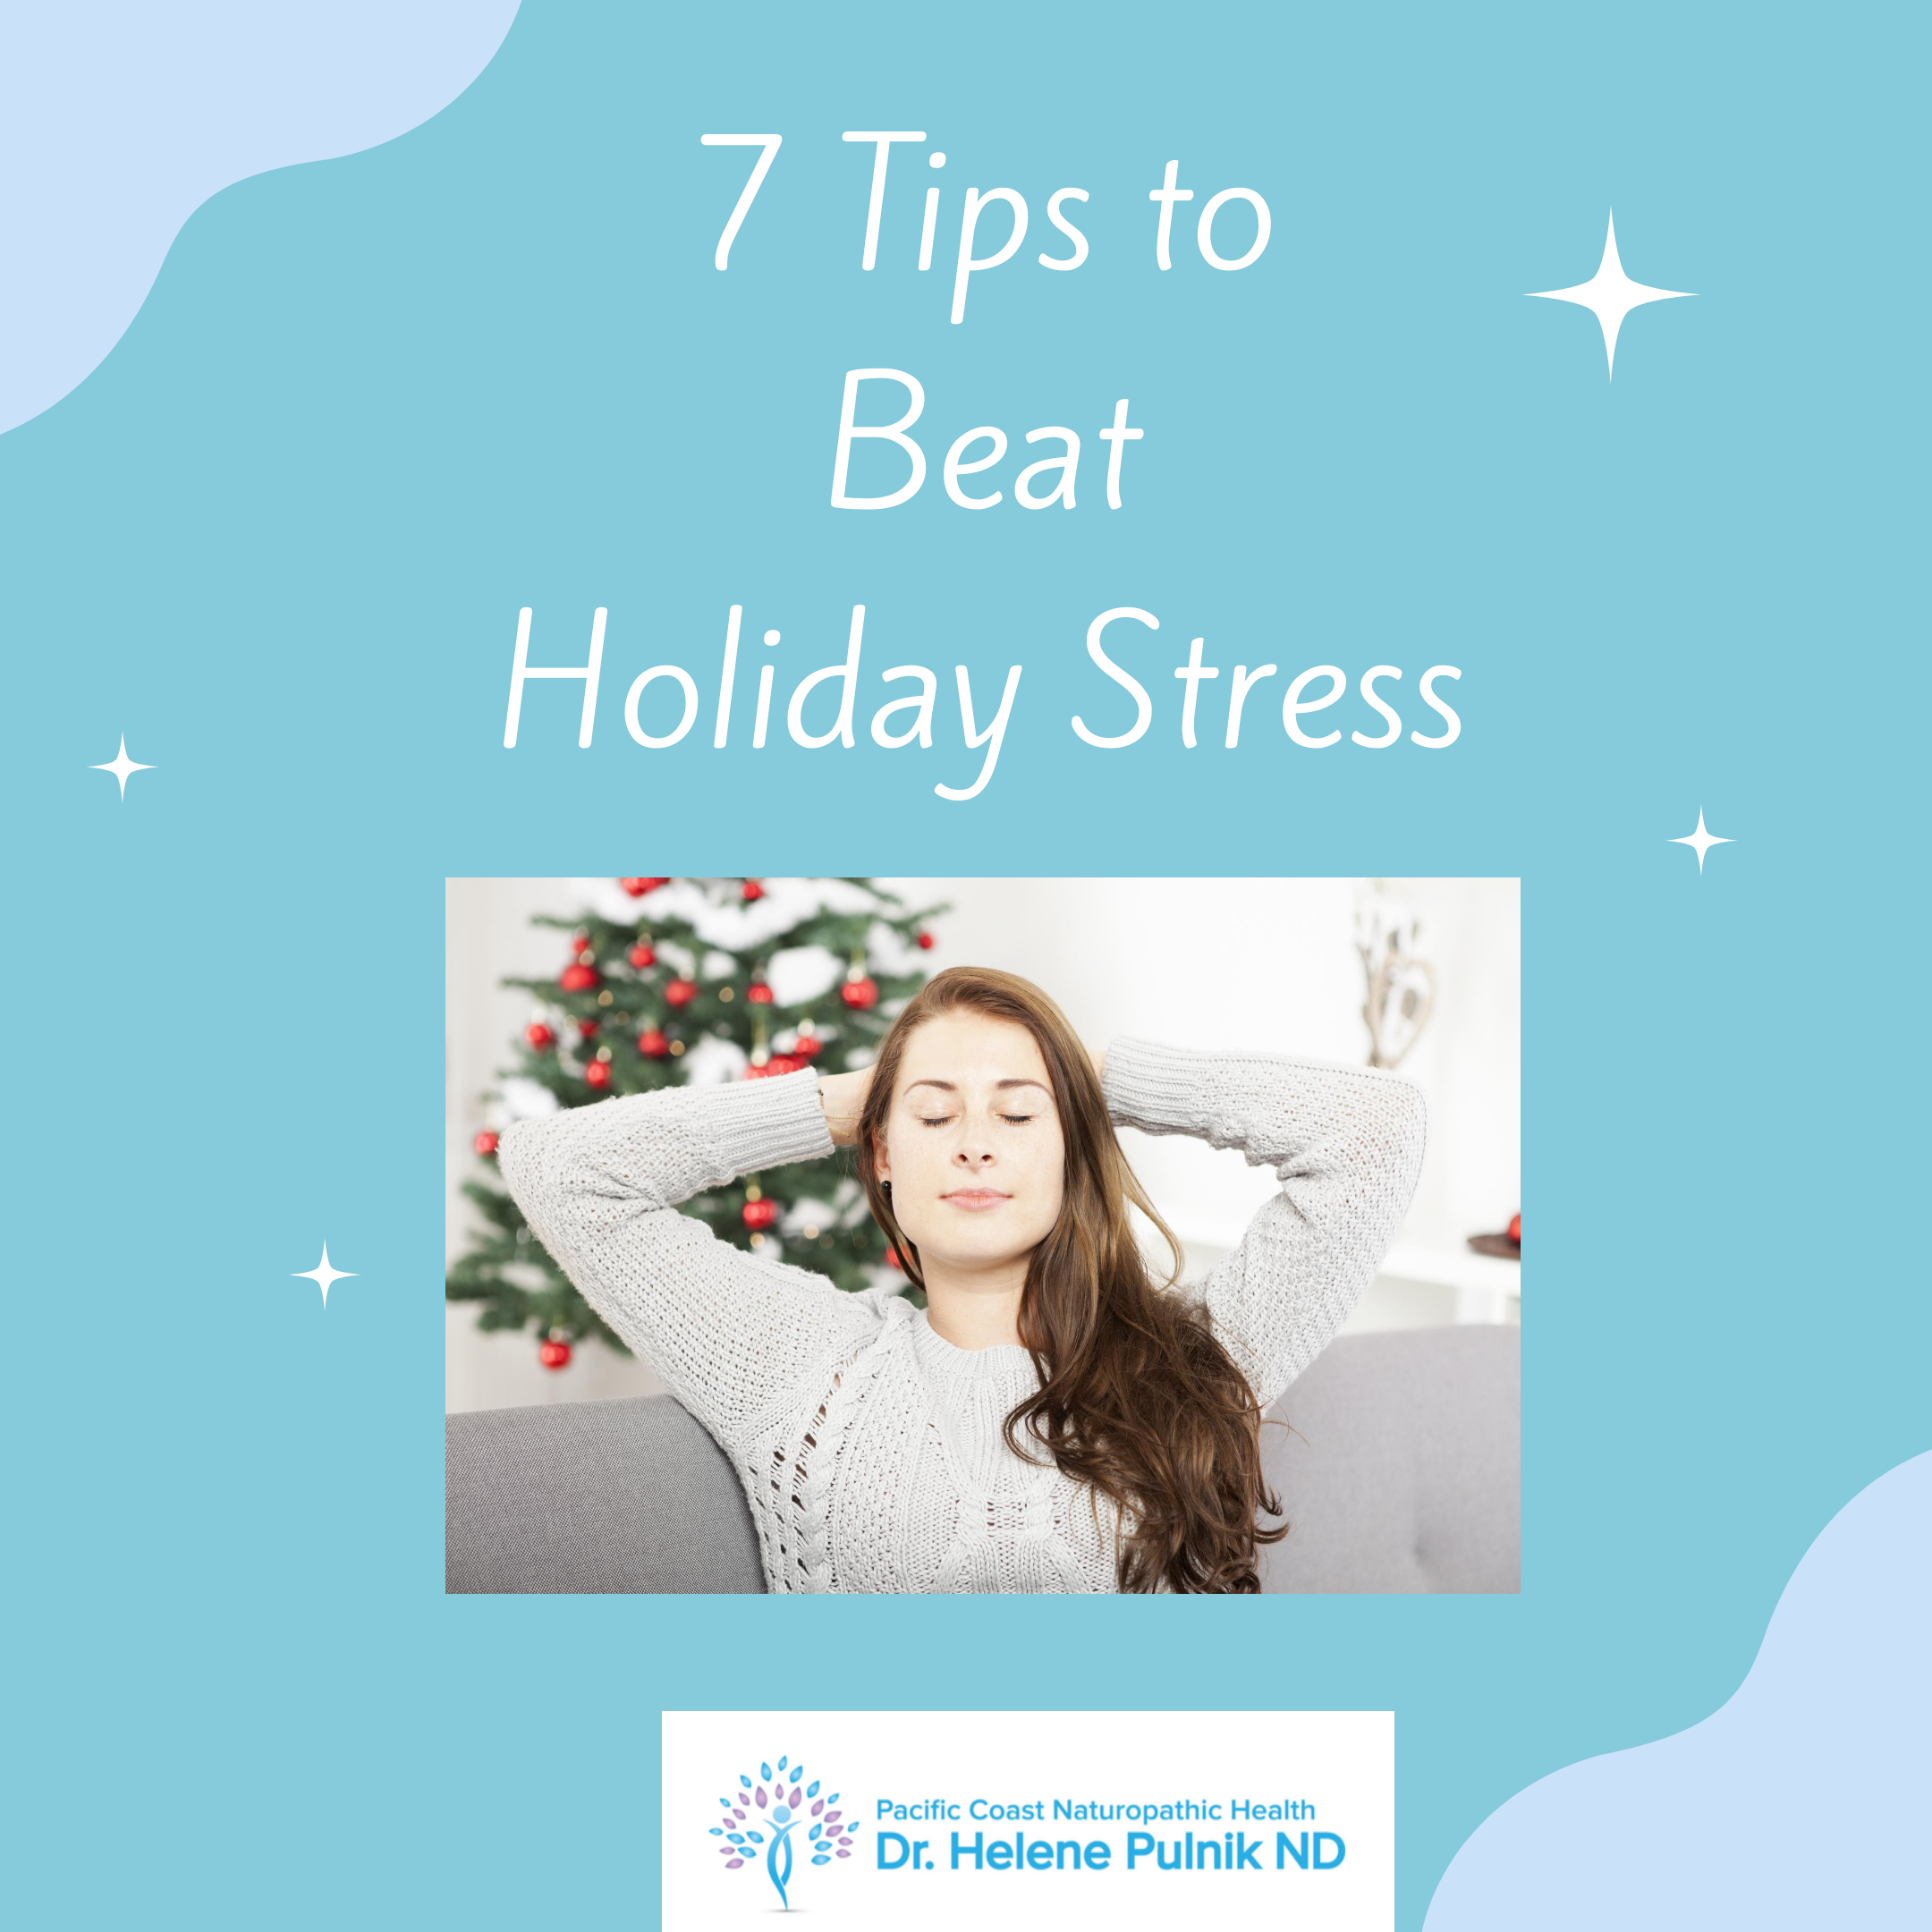 7 Tips to Beat Holiday Stress